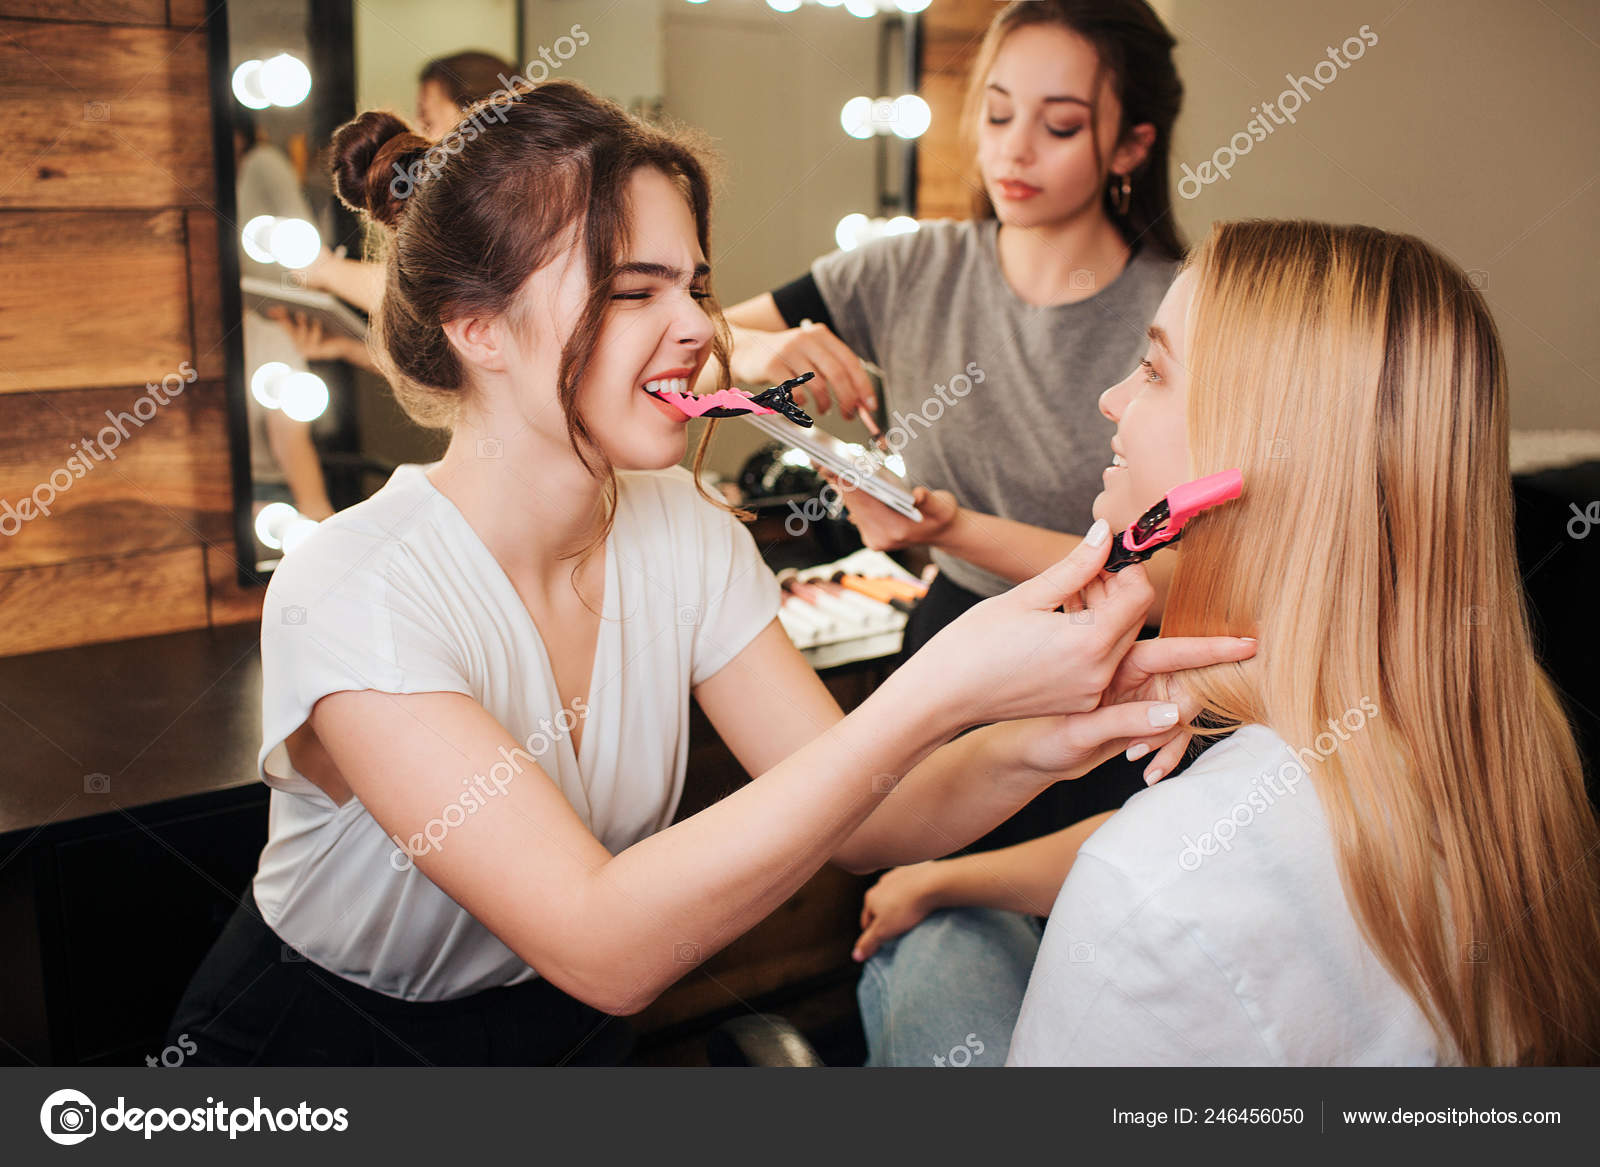 Beauty Room Young Hairdresser Lift Blonde Hair Up With Clips She